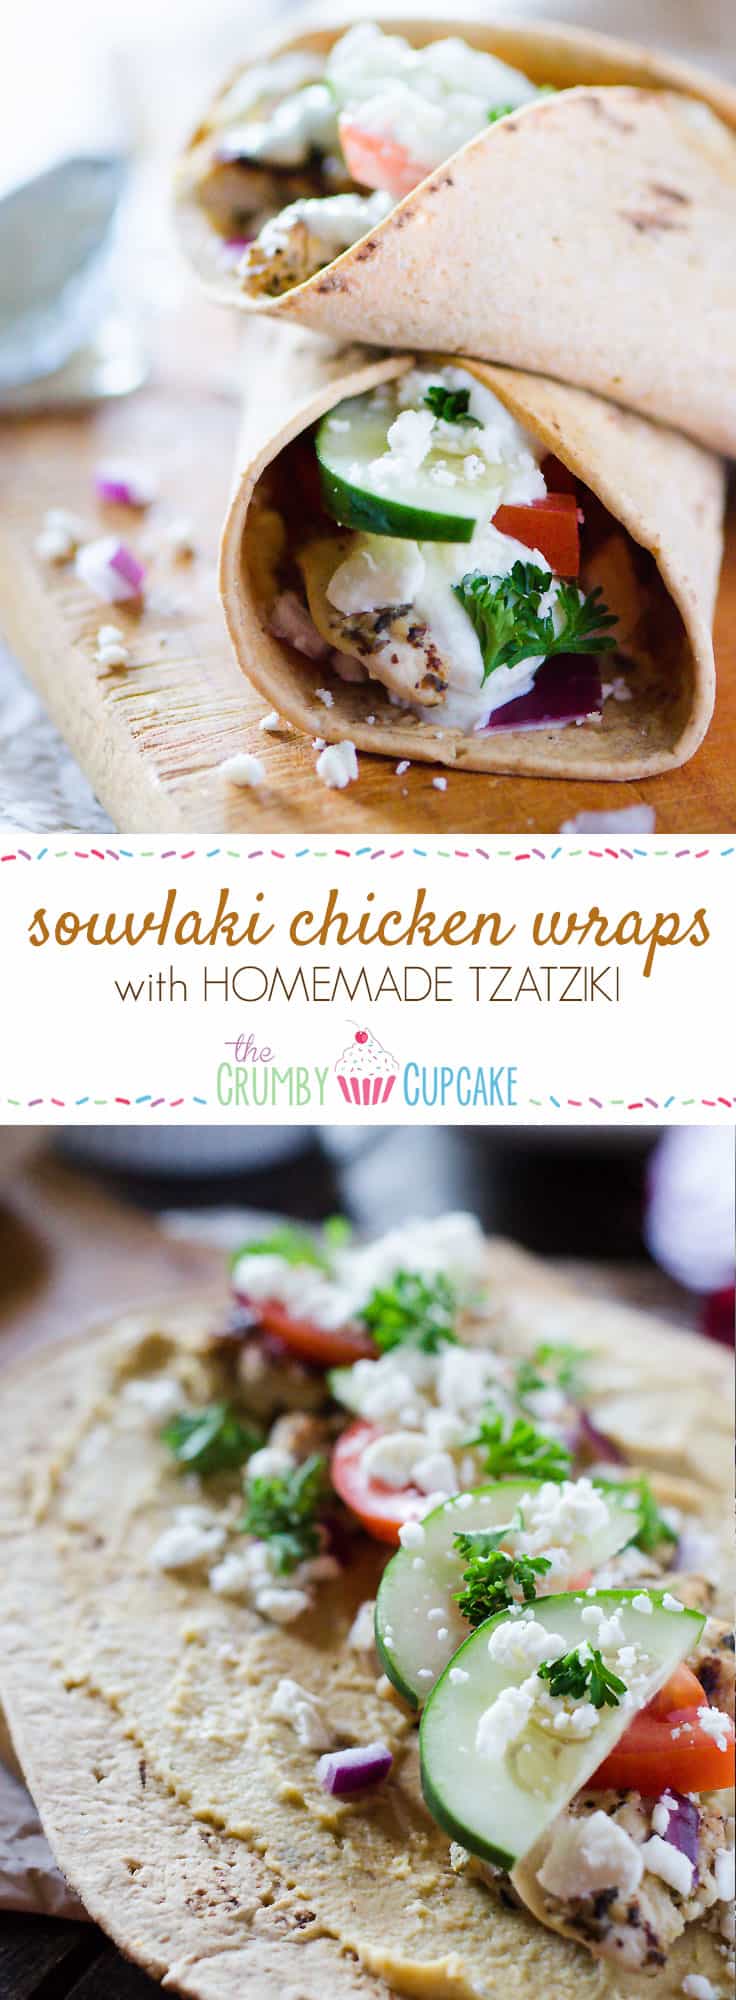 Souvlaki Chicken Wraps with Homemade Tzatziki | Flatbread stuffed with hummus, souvlaki chicken, veggies, feta cheese, and homemade tzatziki, these easy Greek-style wraps are perfect for lunch on the go or a fun #SundaySupper!